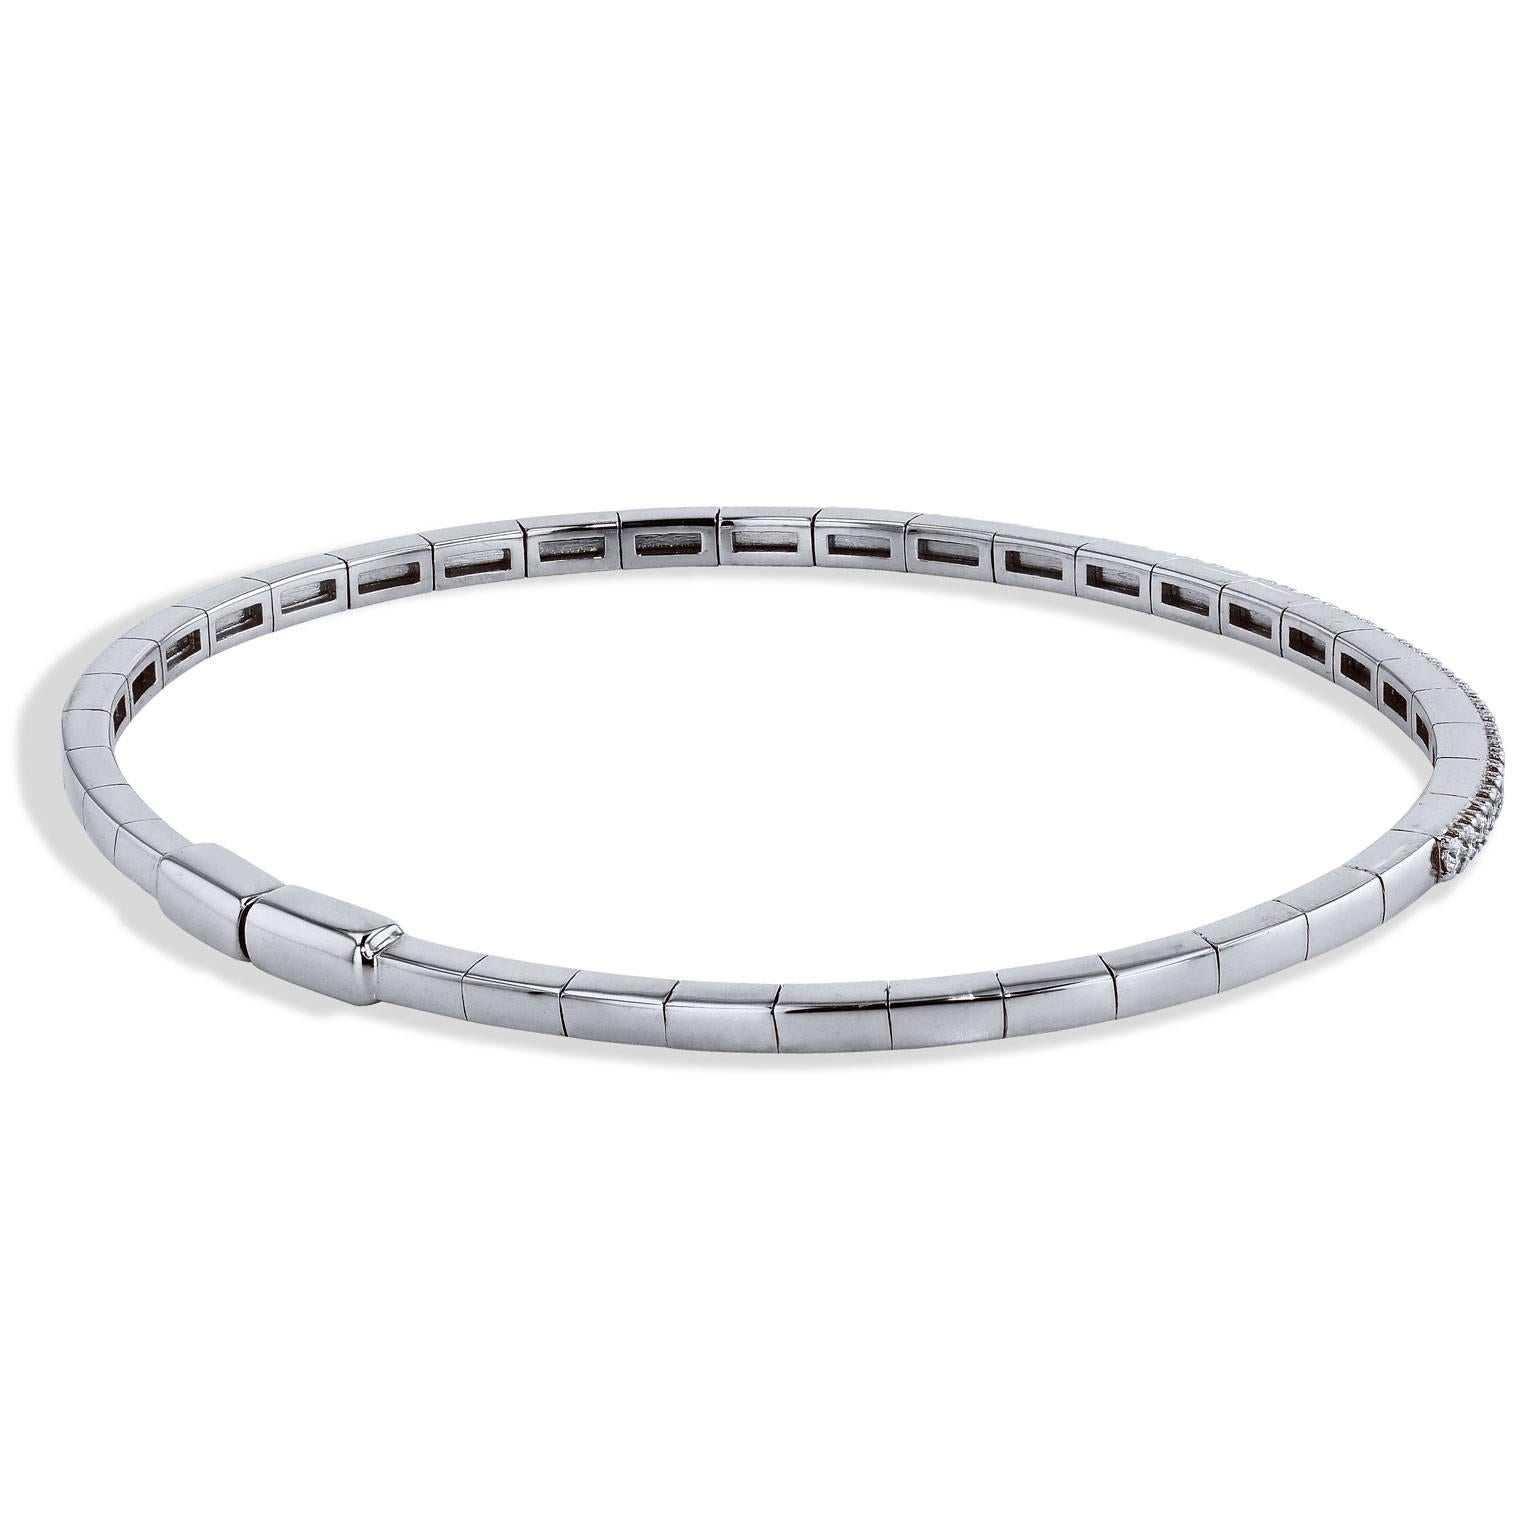 0.59 carat of pave-set diamond are affixed in 18 karat white gold in this magnetic bangle.